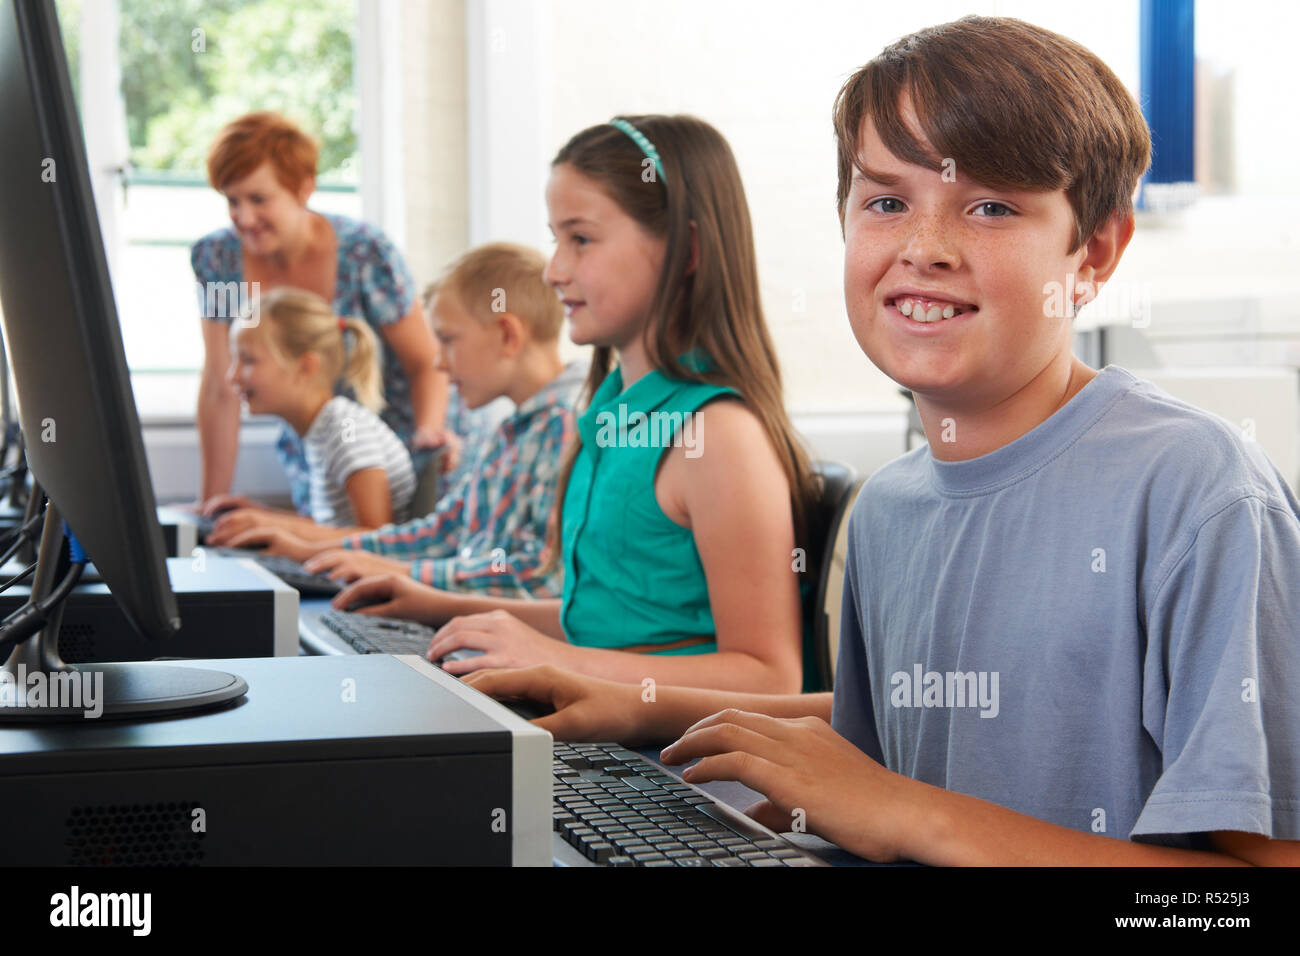 Portrait Of Male Elementary Pupil In Computer Class With Teacher Stock Photo